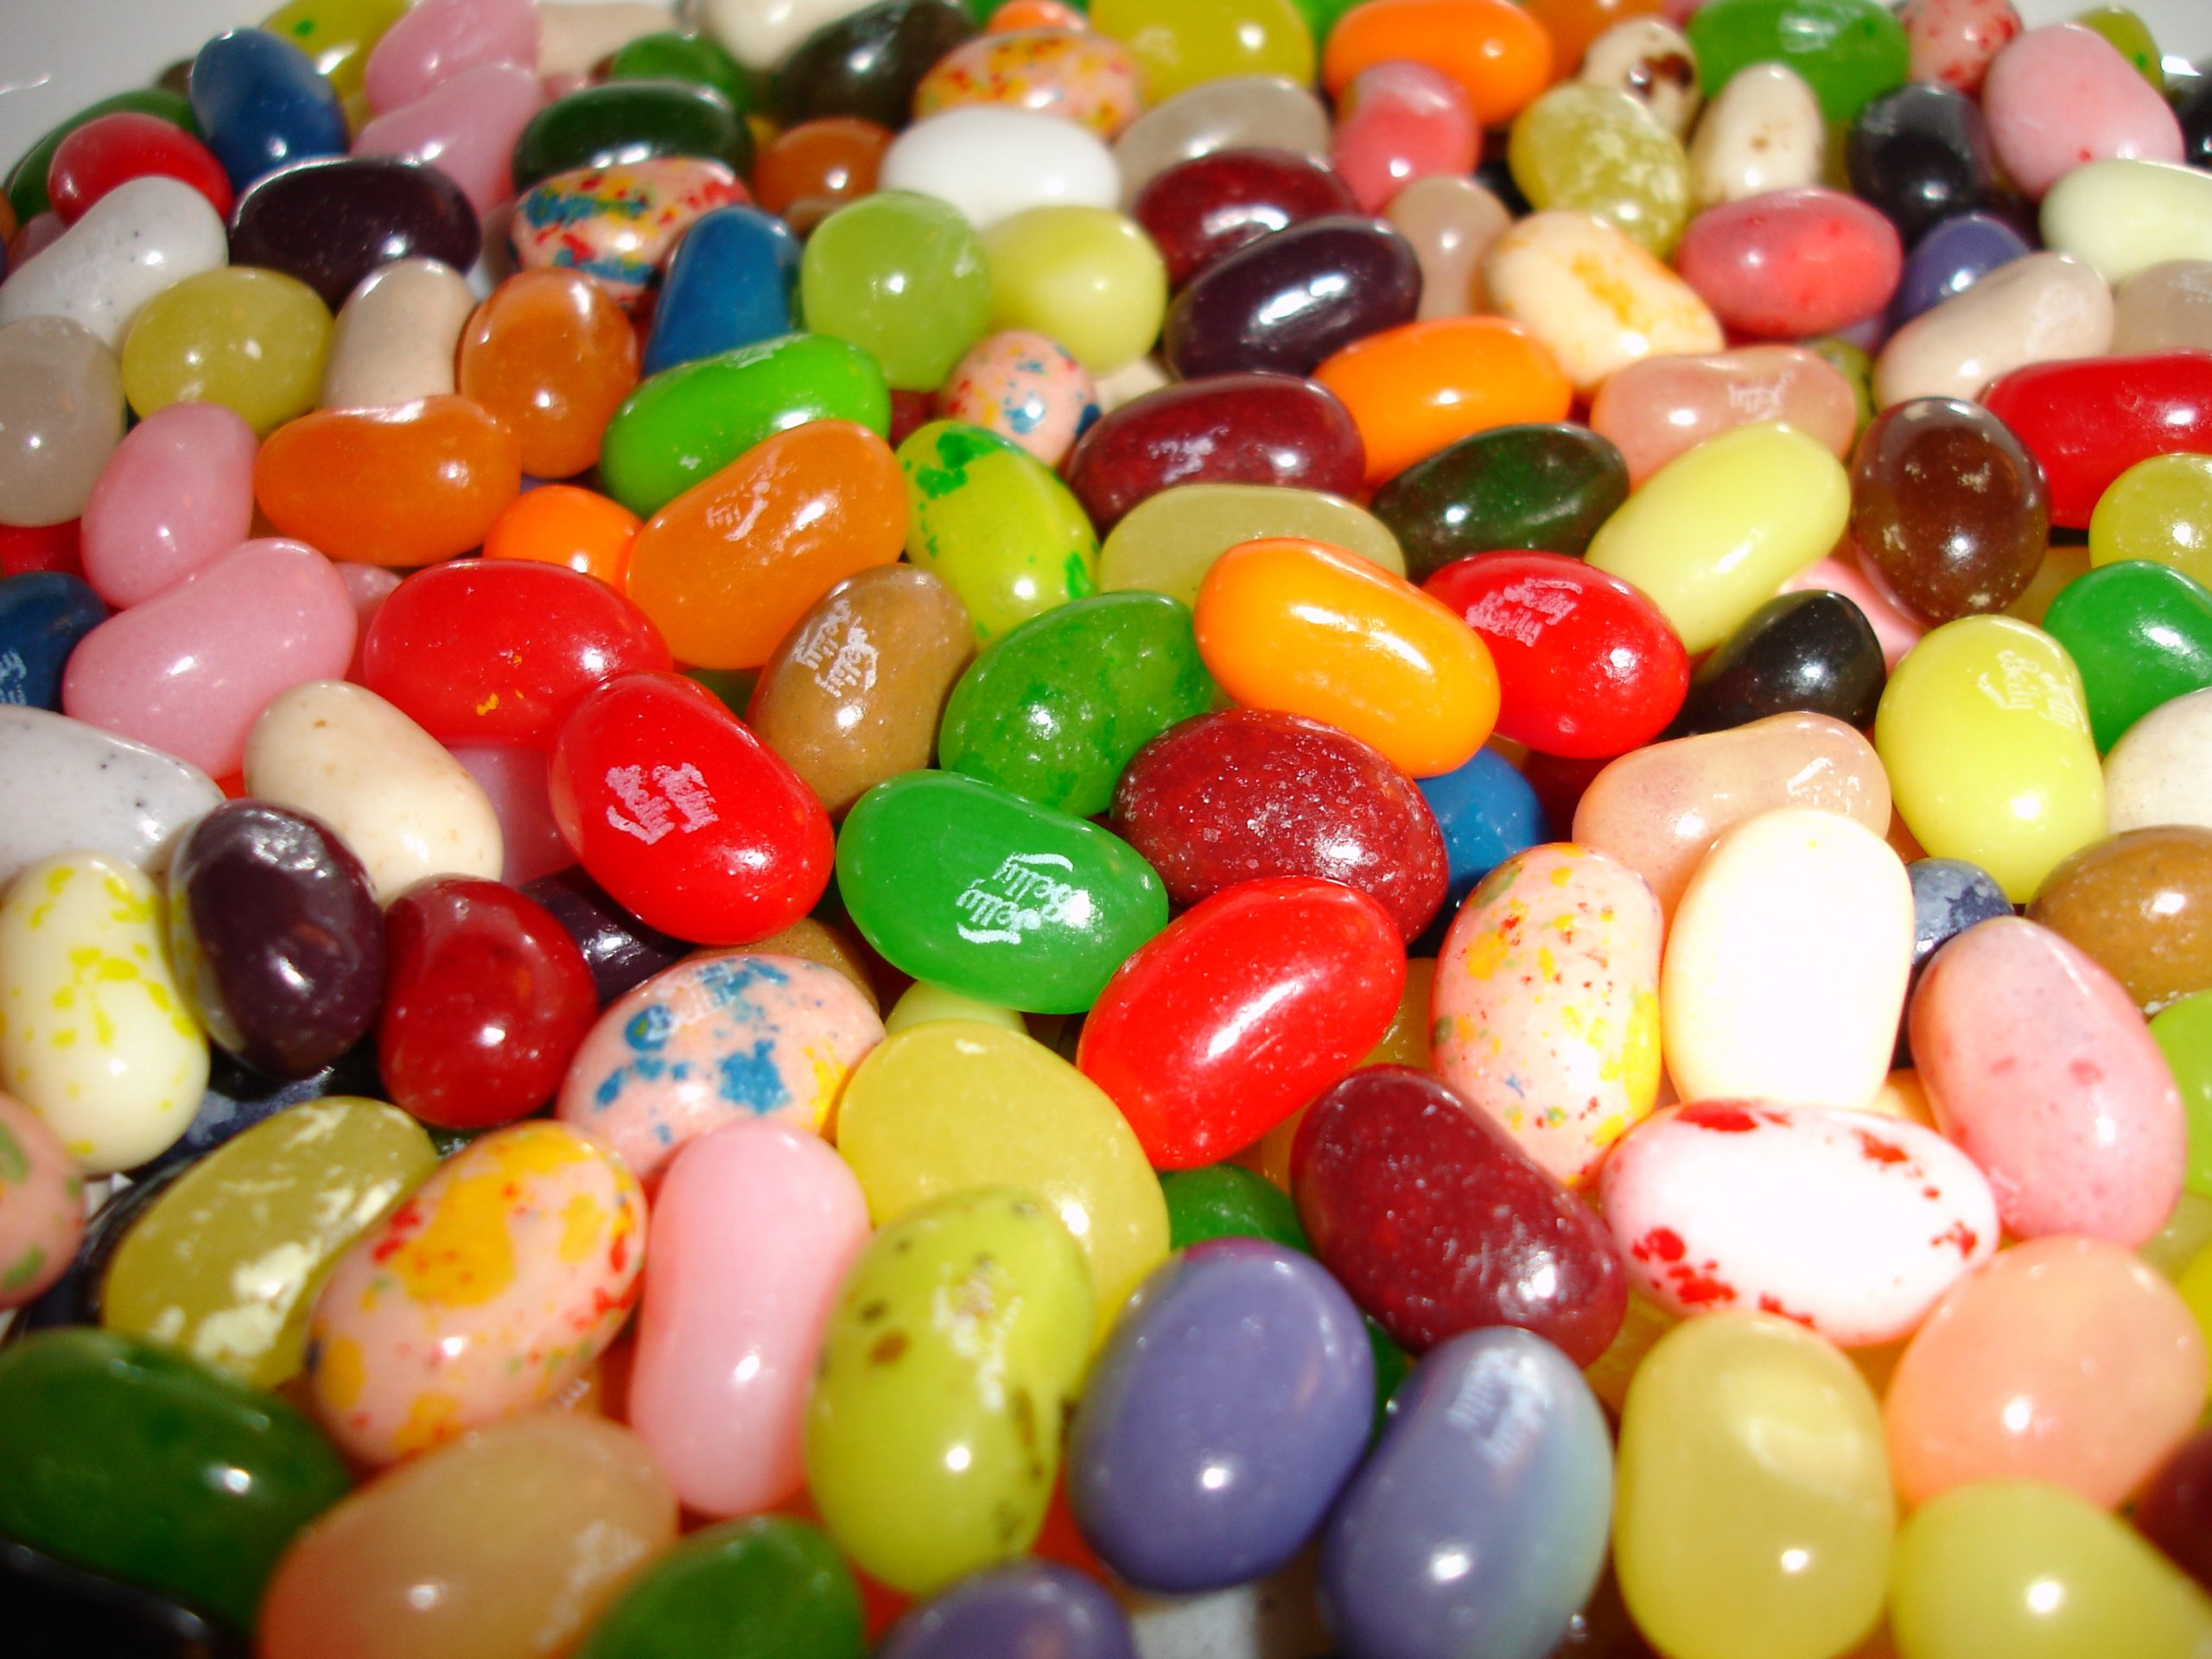 Klein is not directly tied to the jelly bean company anymore but promises a factory